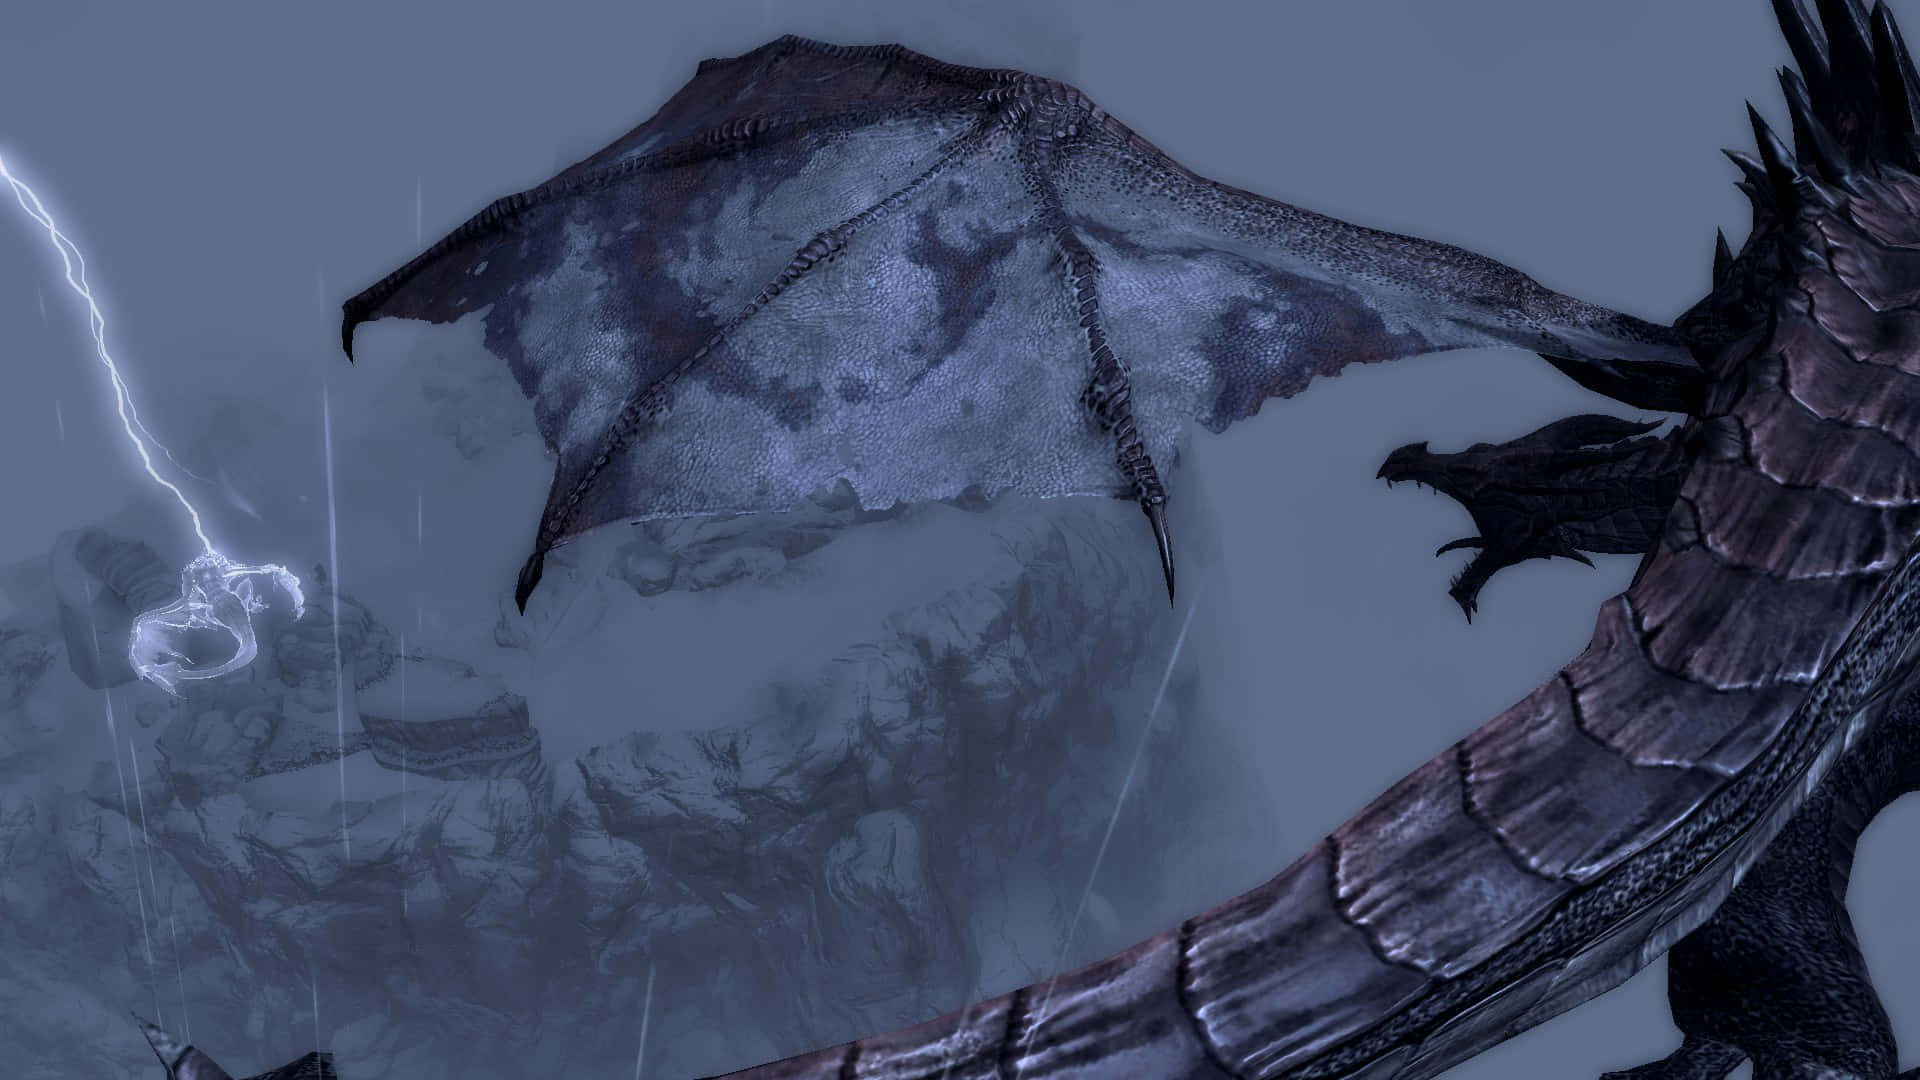 Paarthurnax, the Ancient Dragon atop the Throat of the World in Skyrim Wallpaper